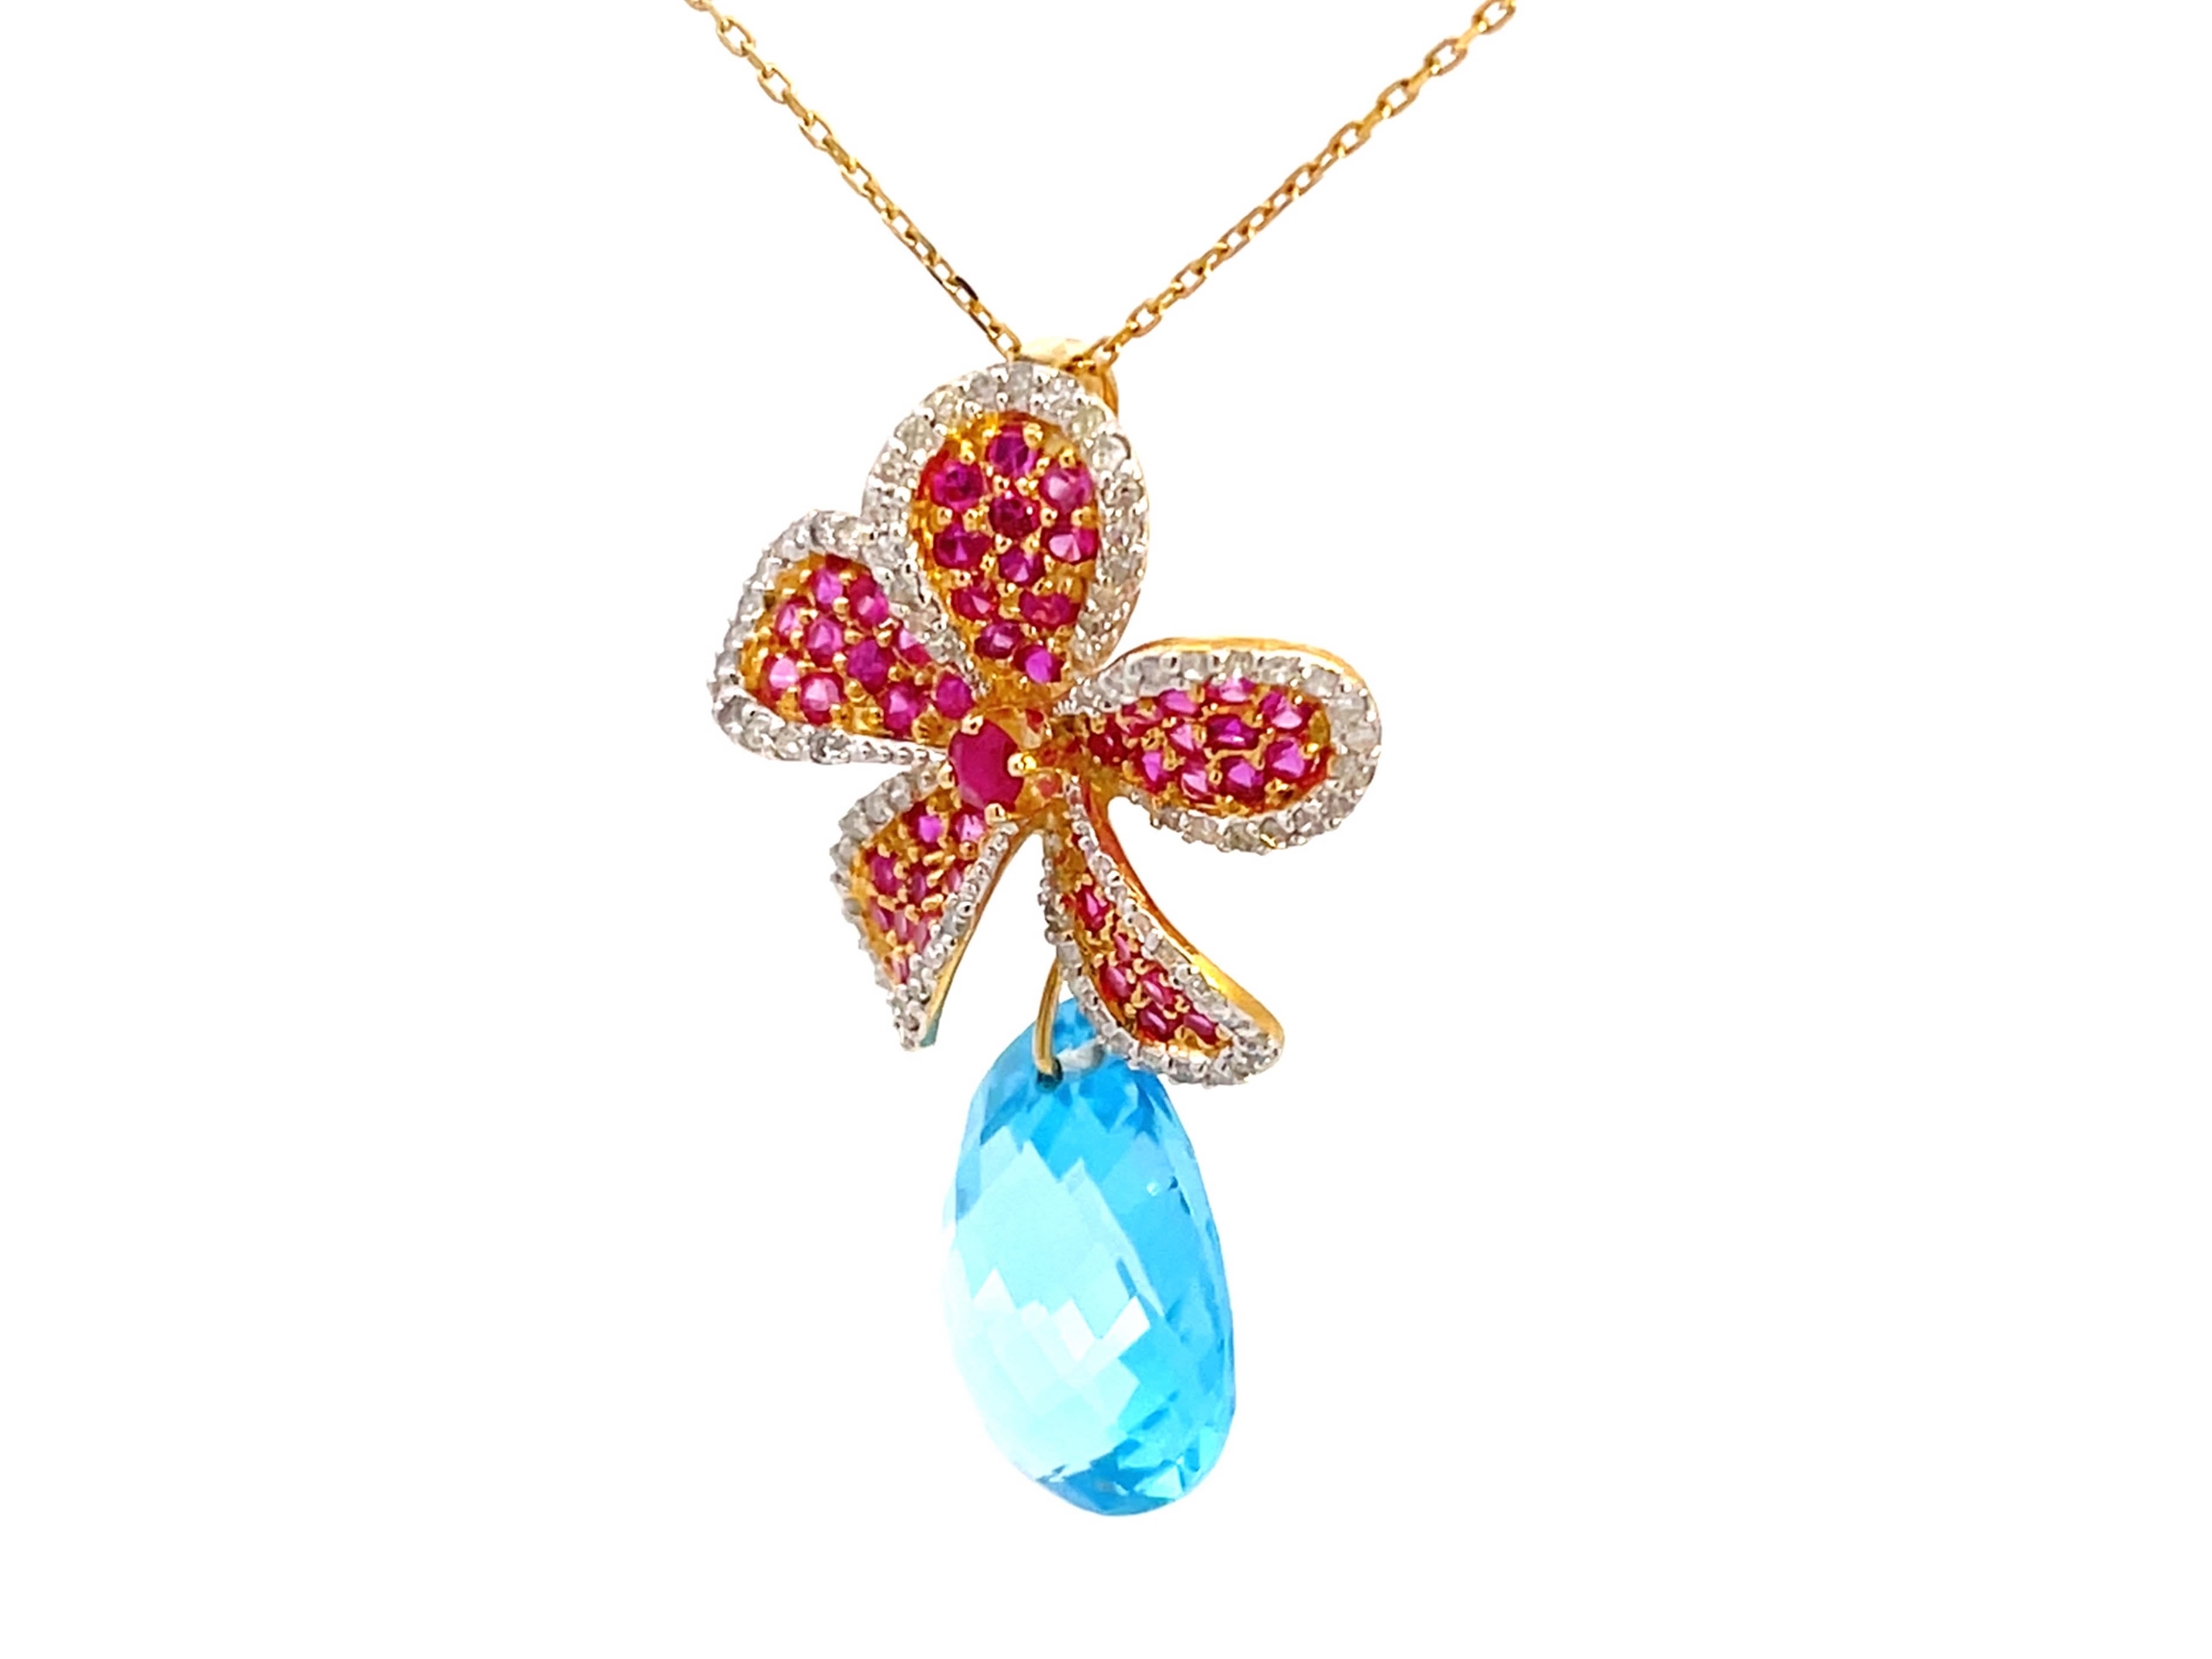 Brilliant Cut Ruby Diamond Flower Necklace with Topaz Drop in 14k Yellow Gold For Sale